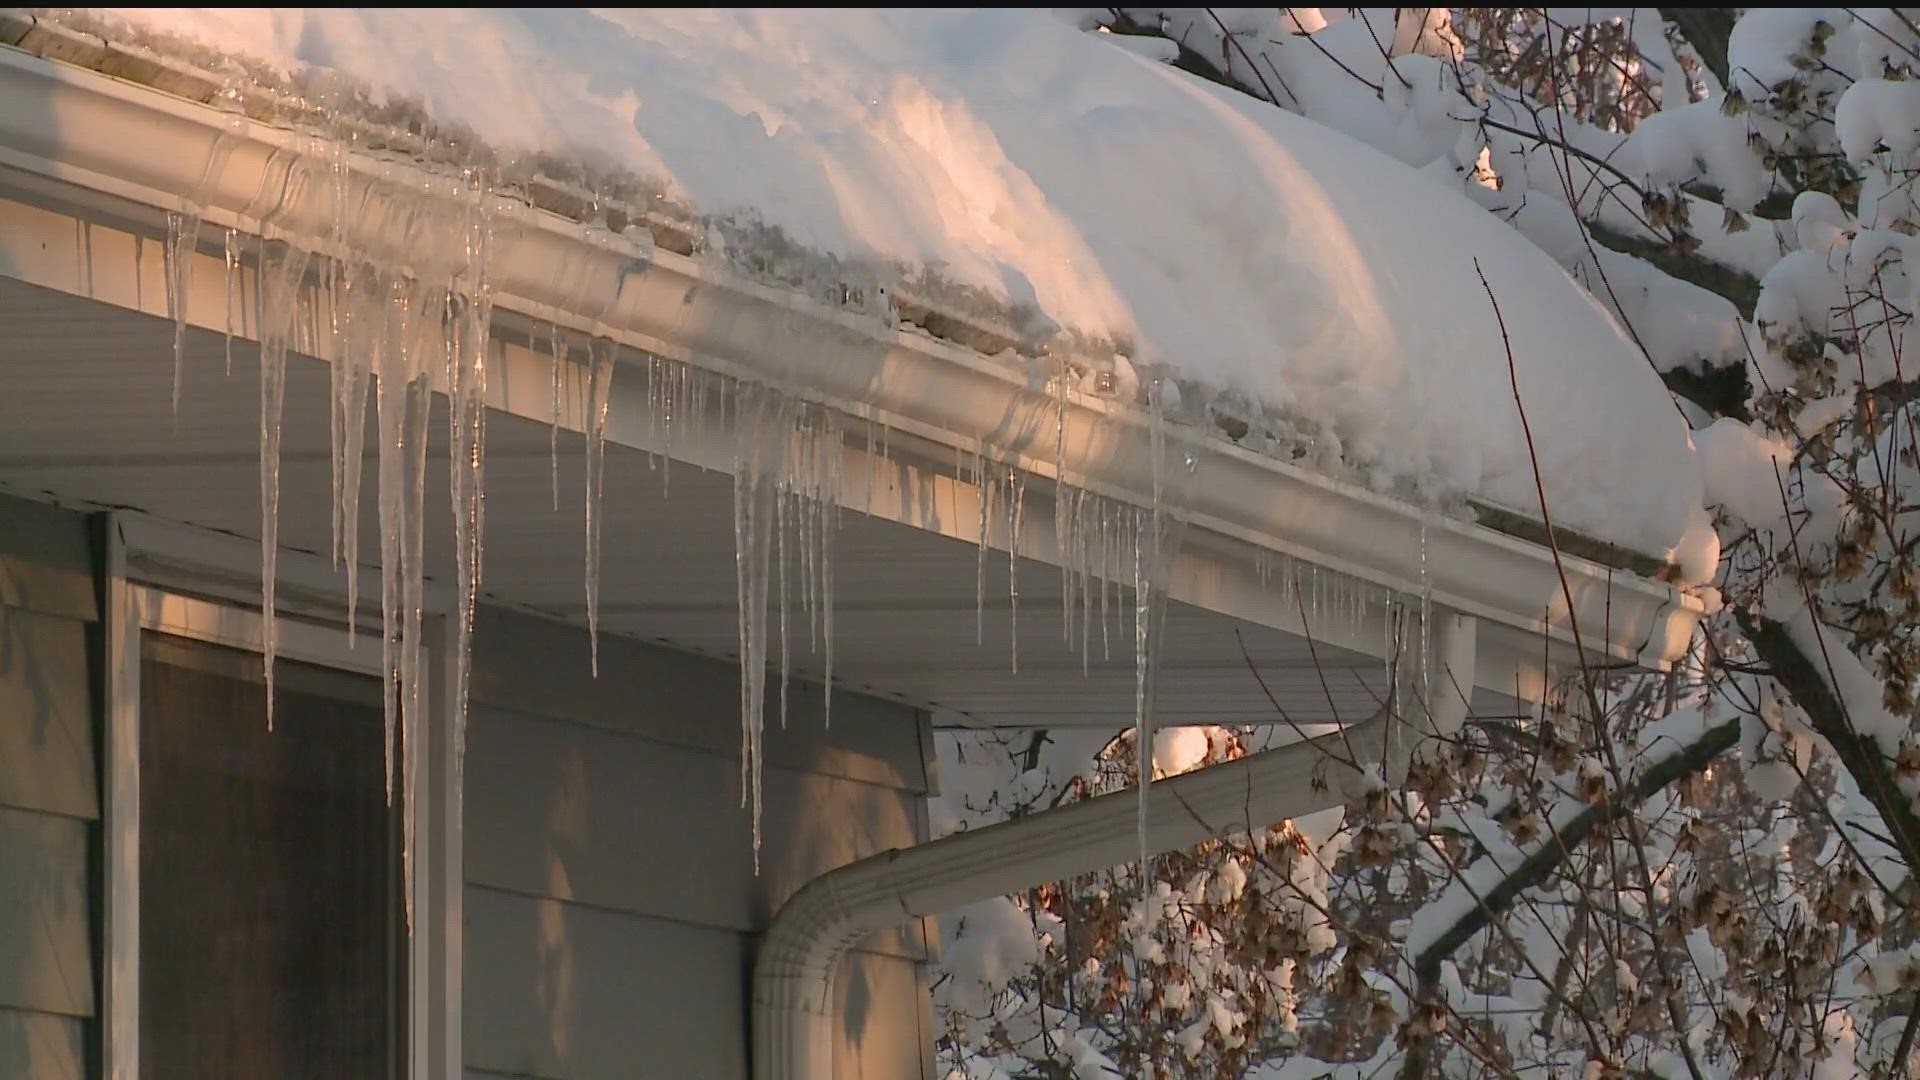 Rob Corniea with Minnesota Exteriors discusses what homeowners should do ahead of this week's snow to avoid major house damage.